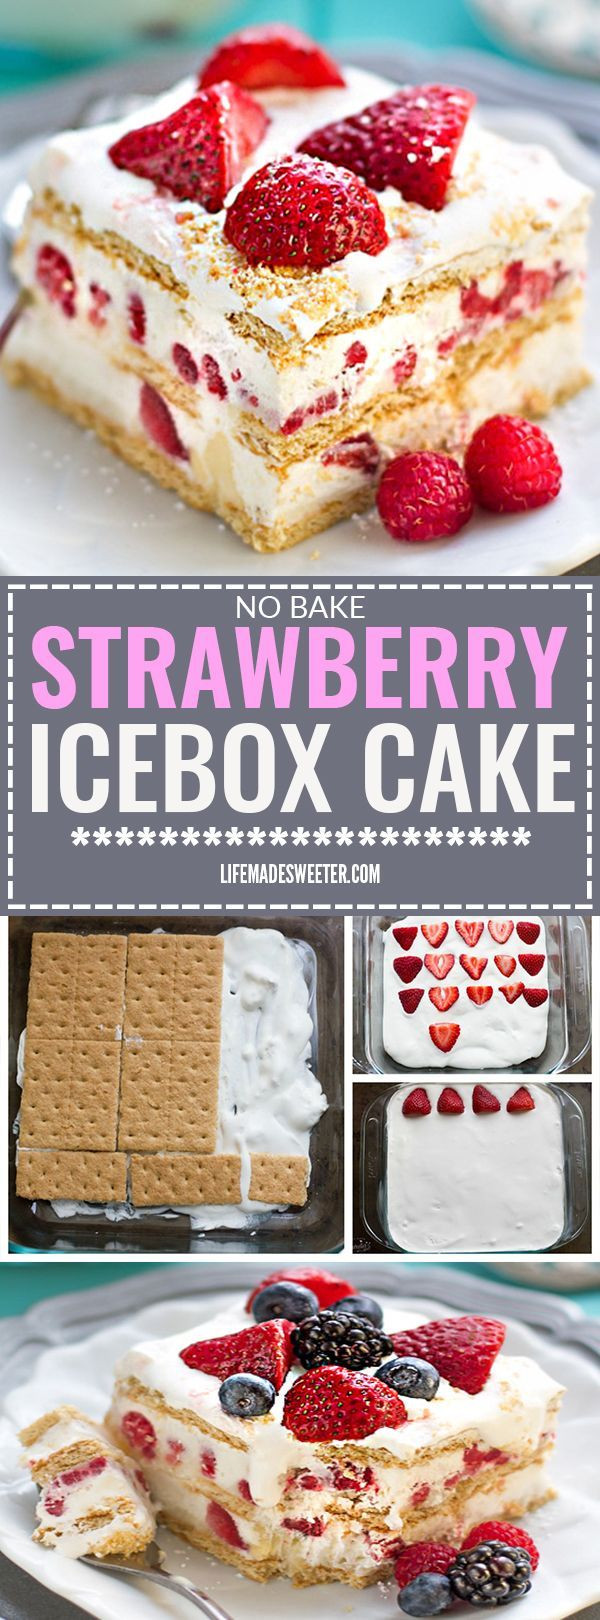 Baked Cakes &amp; Gourmet Desserts Llc
 No BAKE Strawberry Cheesecake Icebox Cake is the perfect